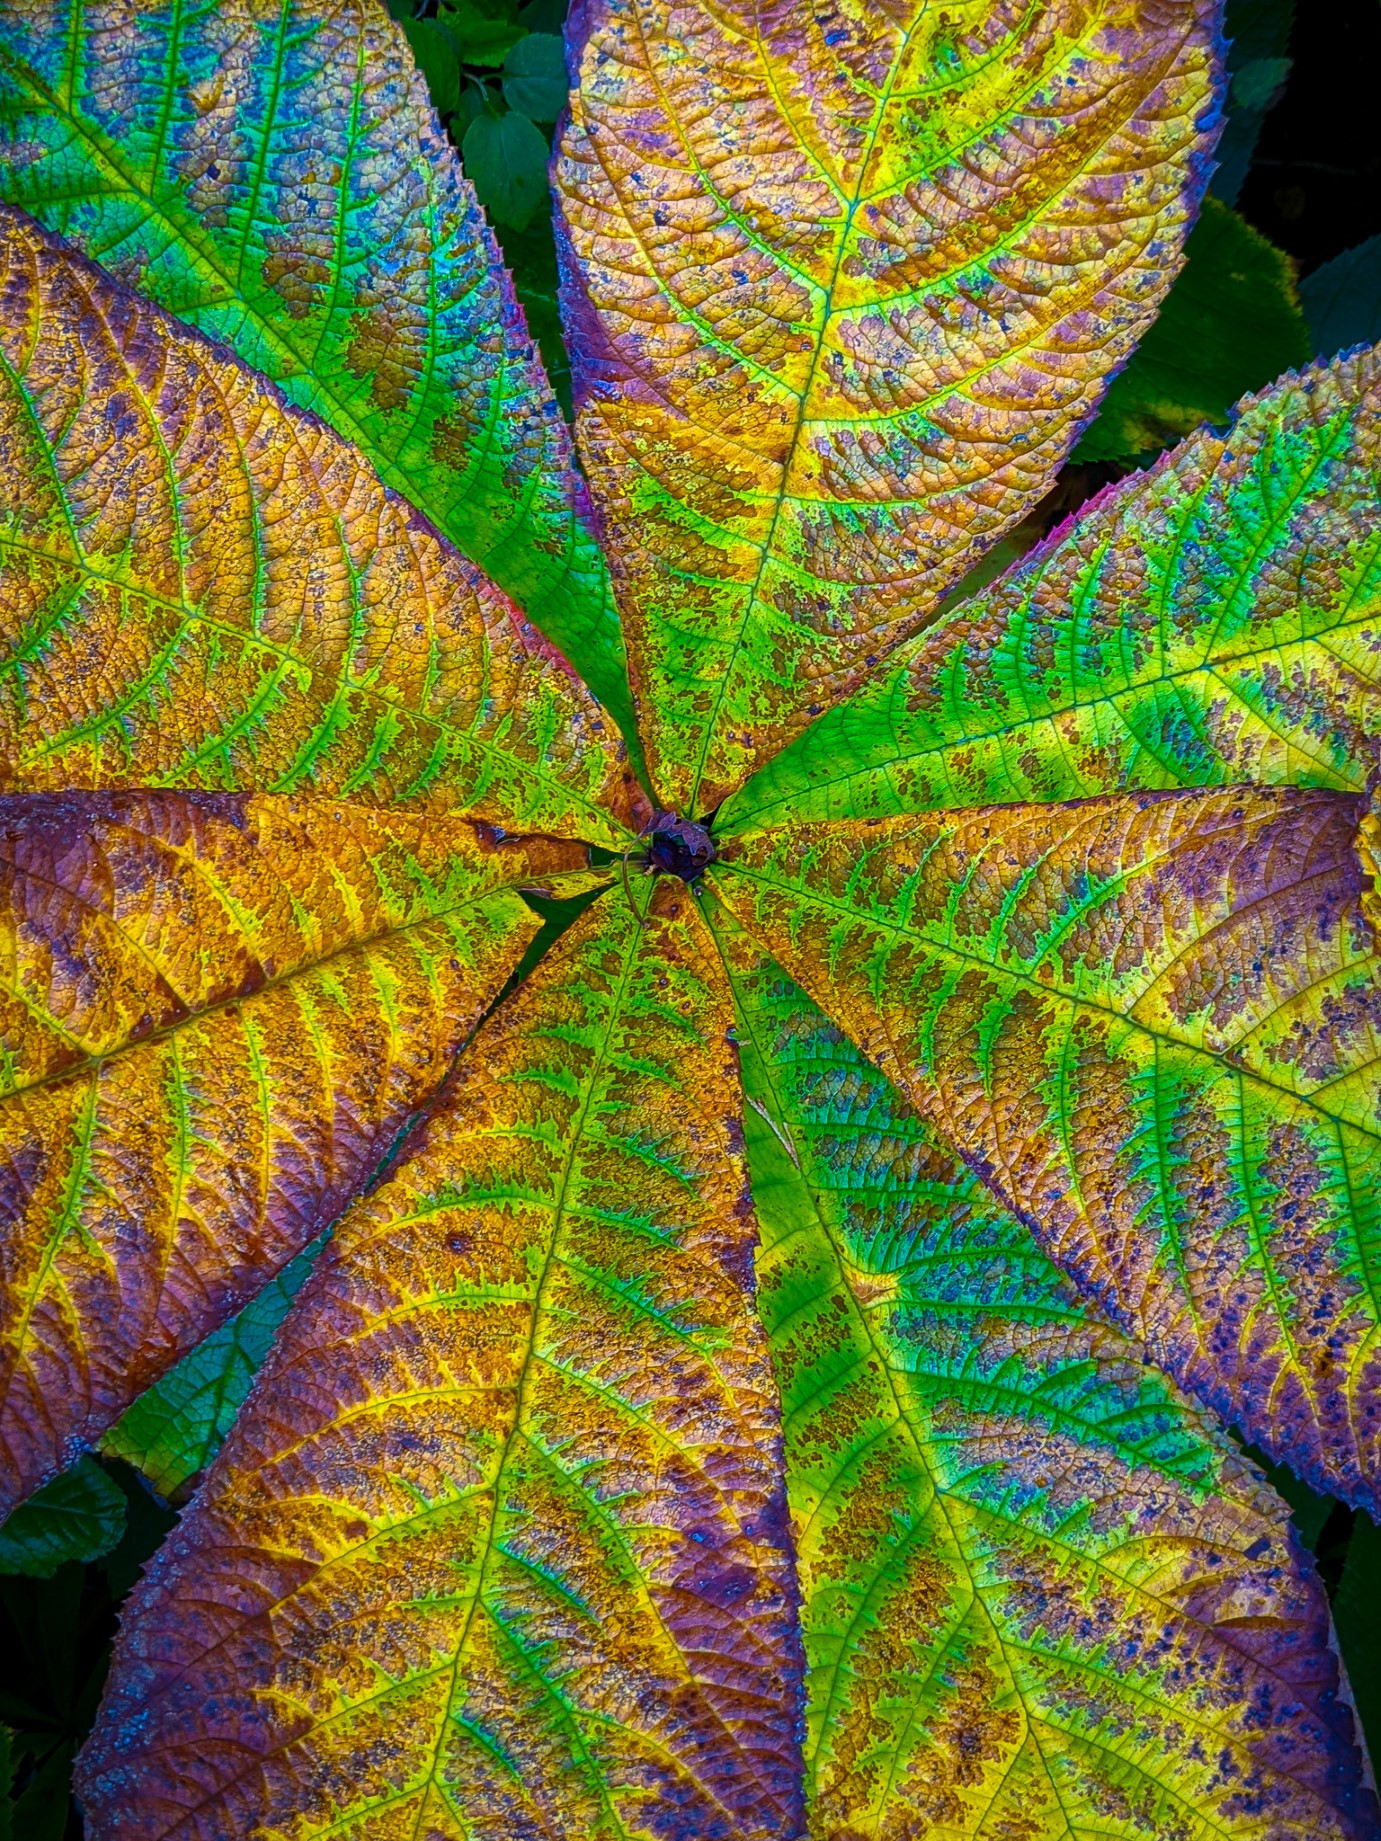 You’re looking at the leaves of a plant from above. The leaves have vivid colours.